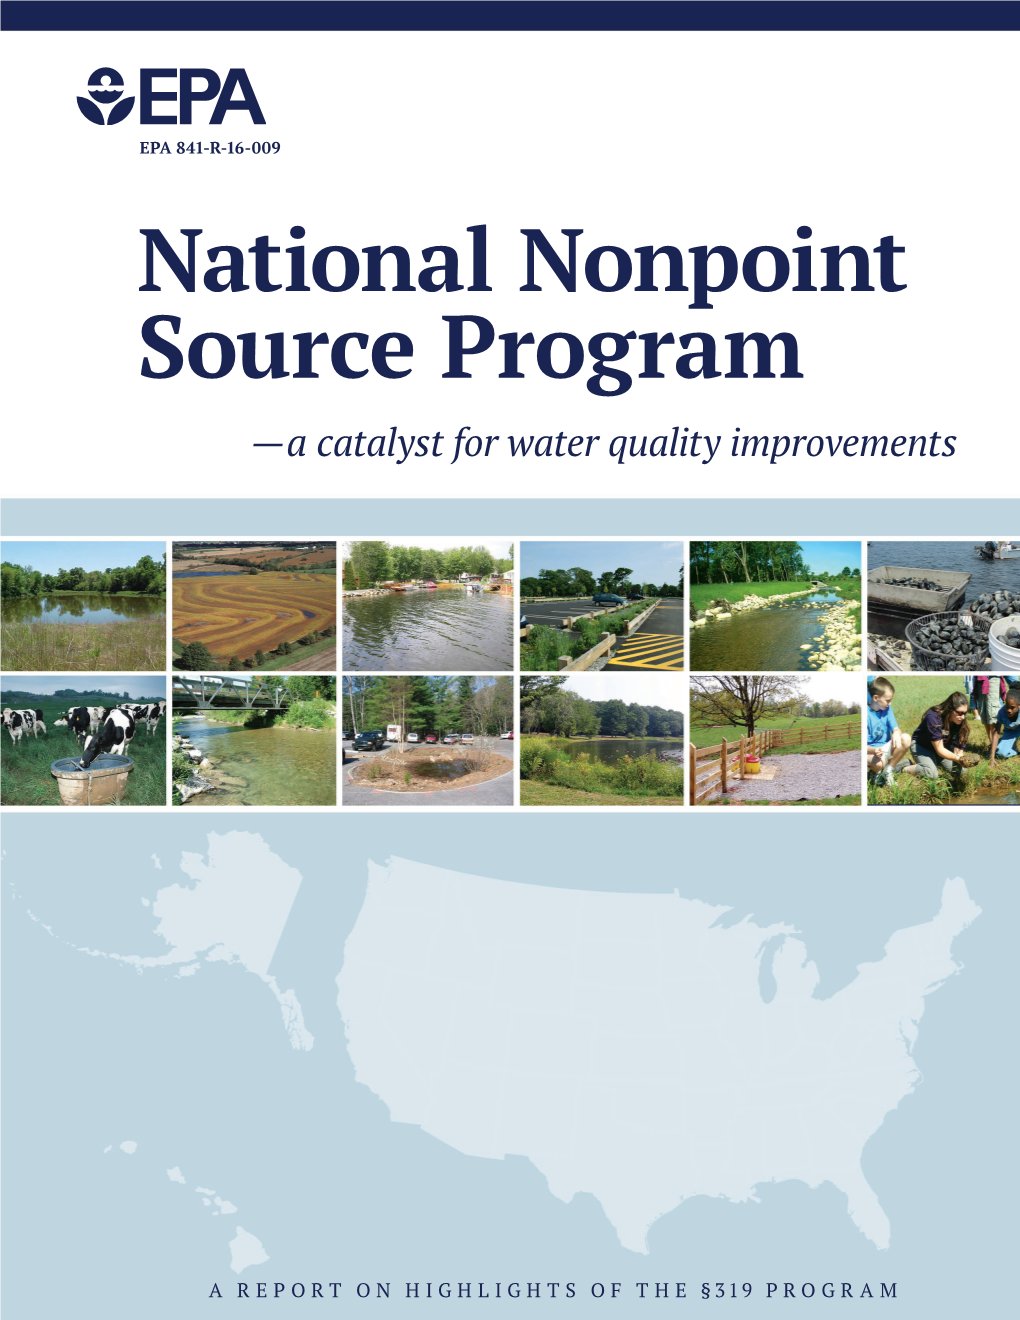 National Nonpoint Source Program — a Catalyst for Water Quality Improvements